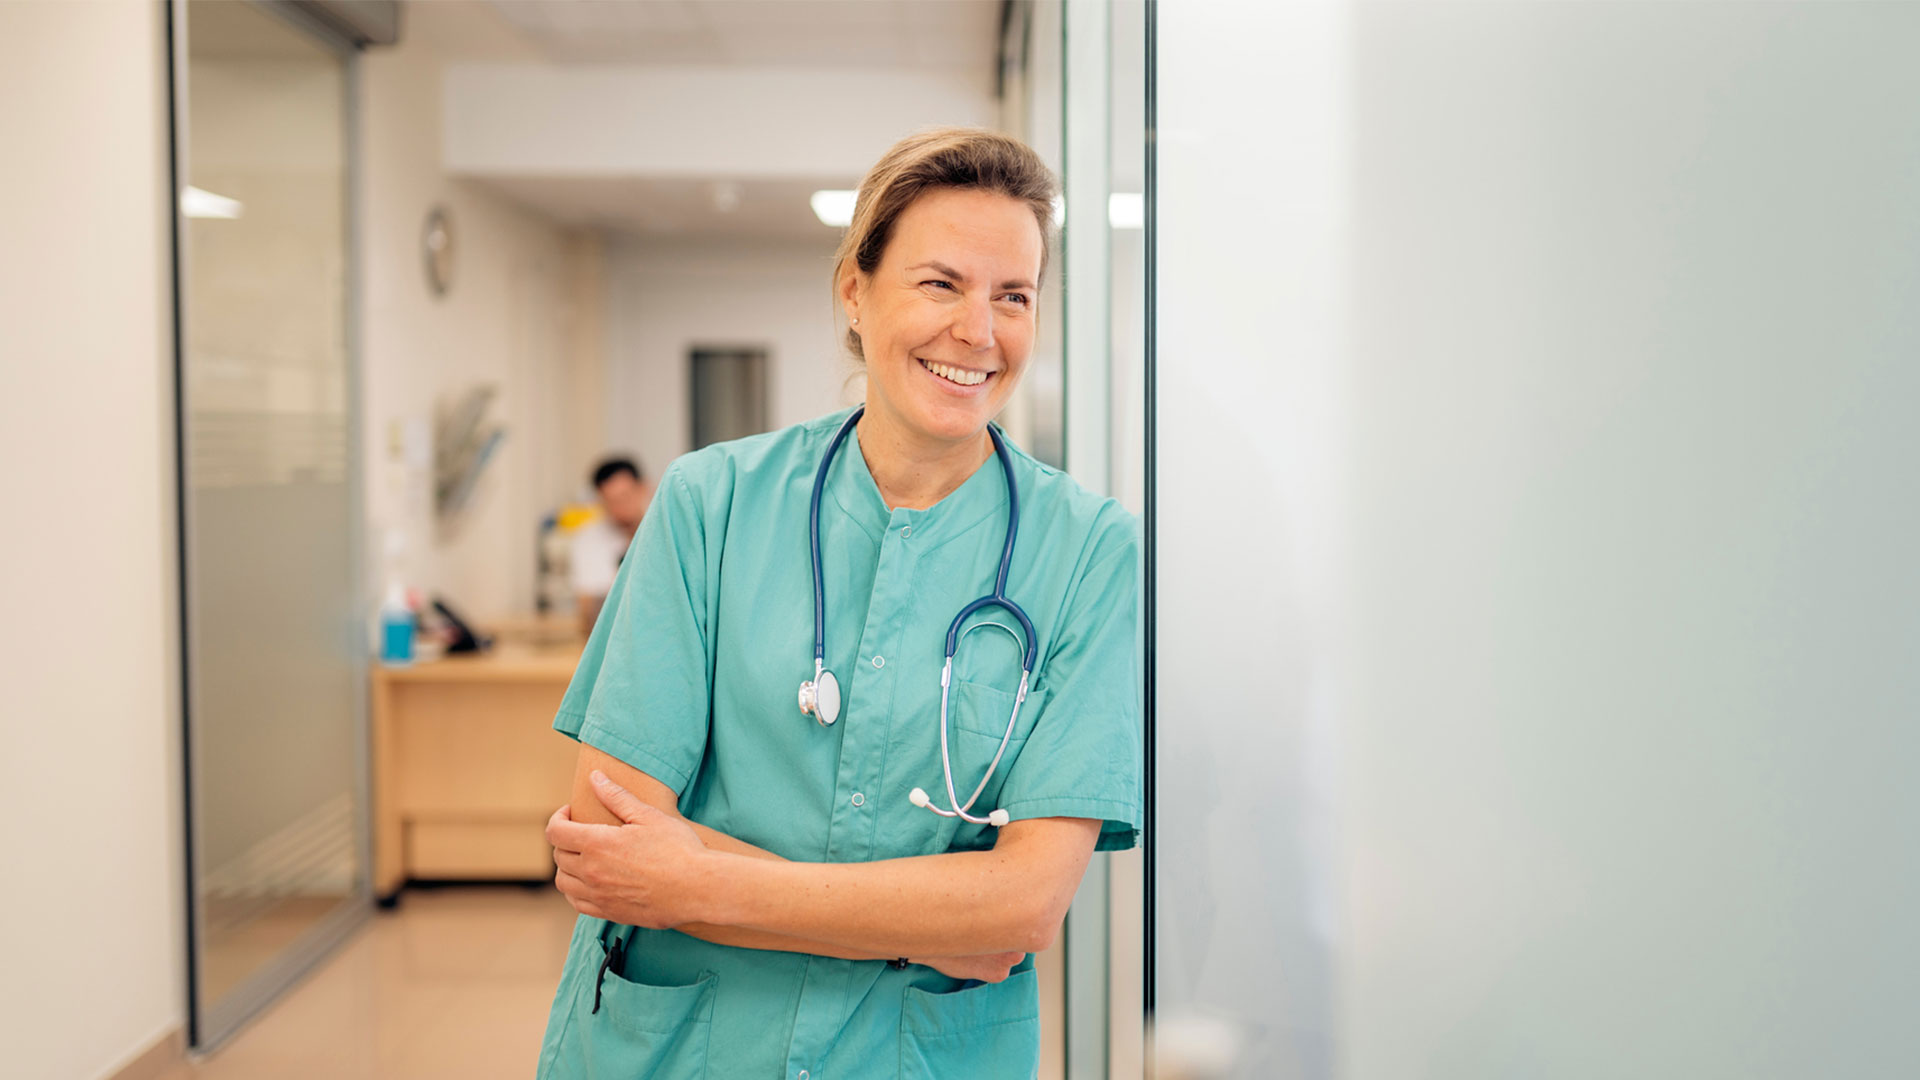 woman doctor wearing teal scrubs and a stethoscope around her neck leaning agains a wall casually smiling